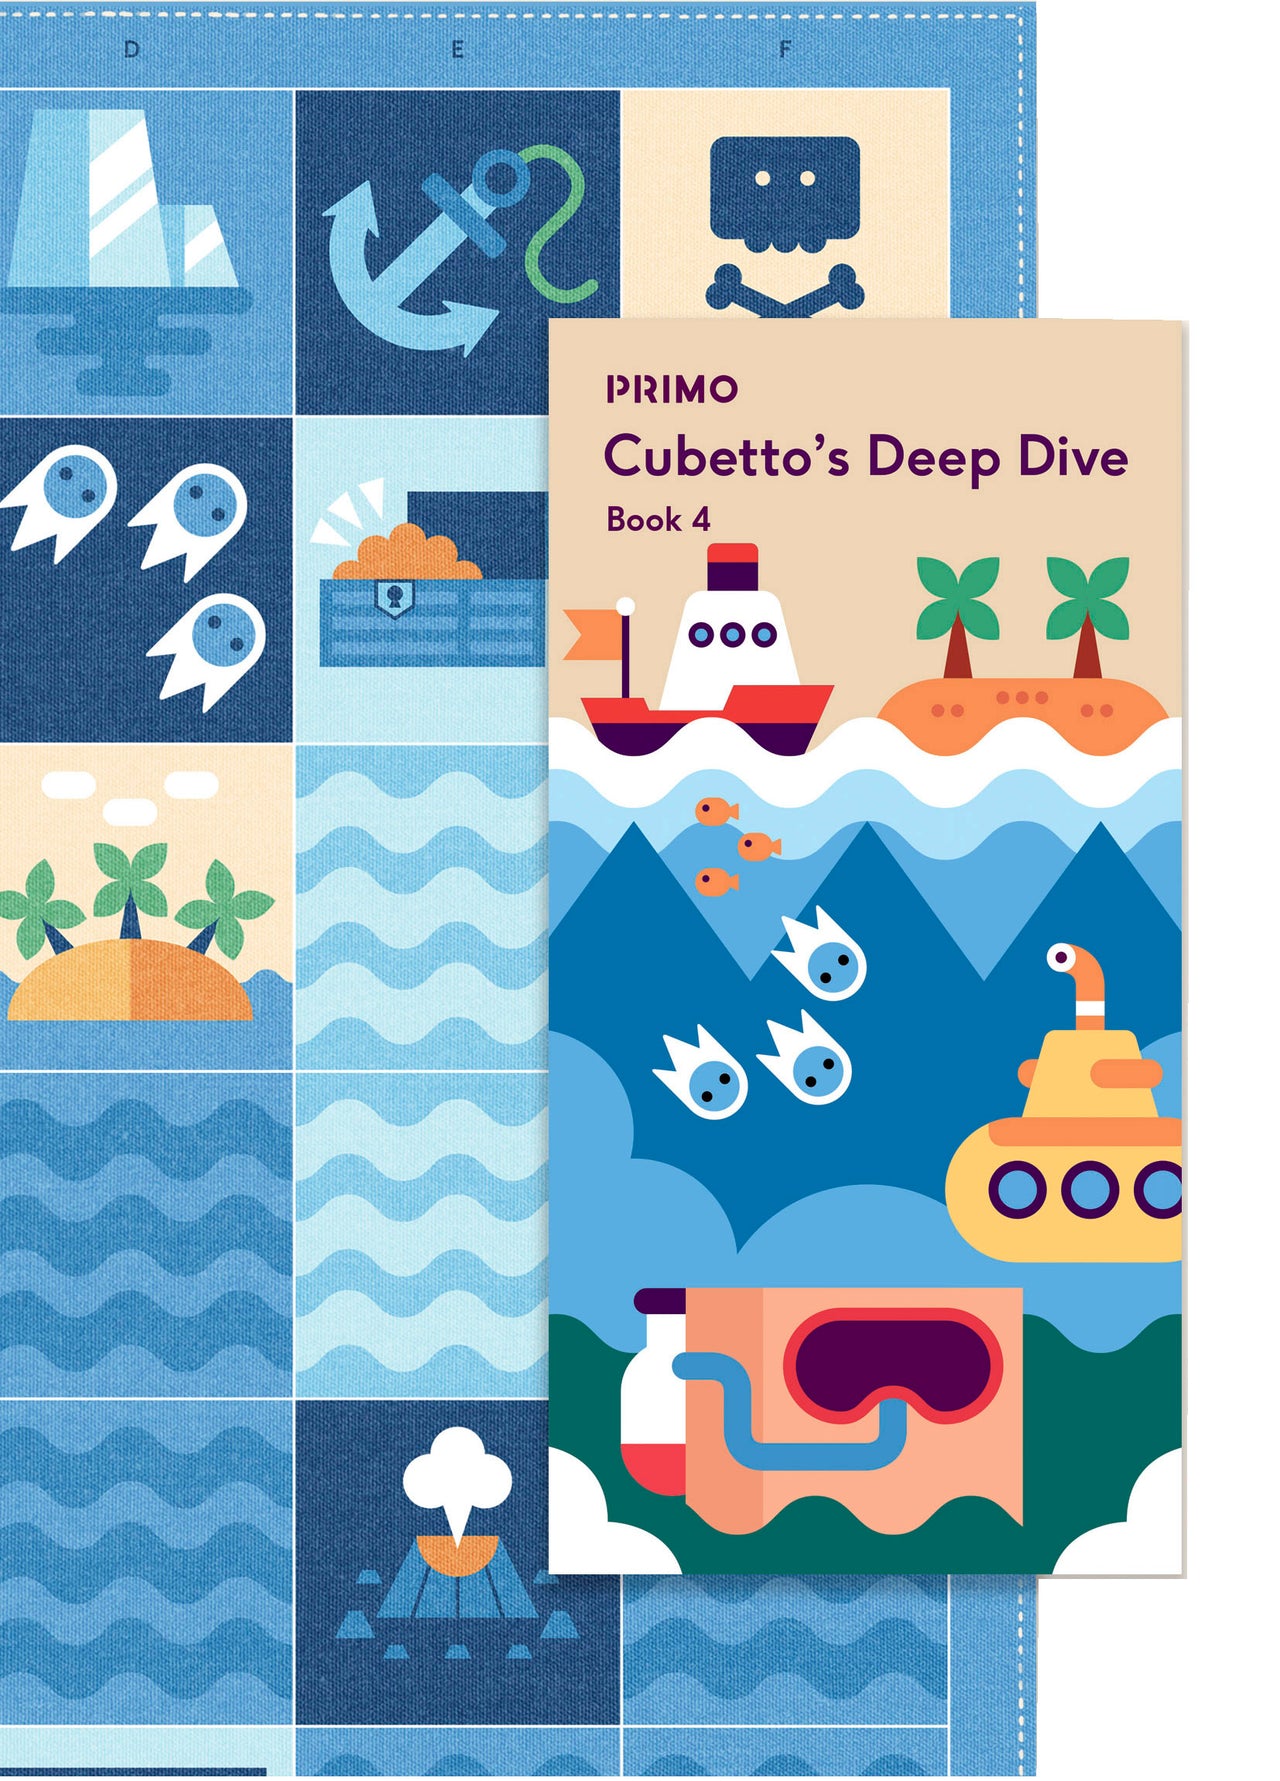 cubetto’s deep dive - ocean map and story book